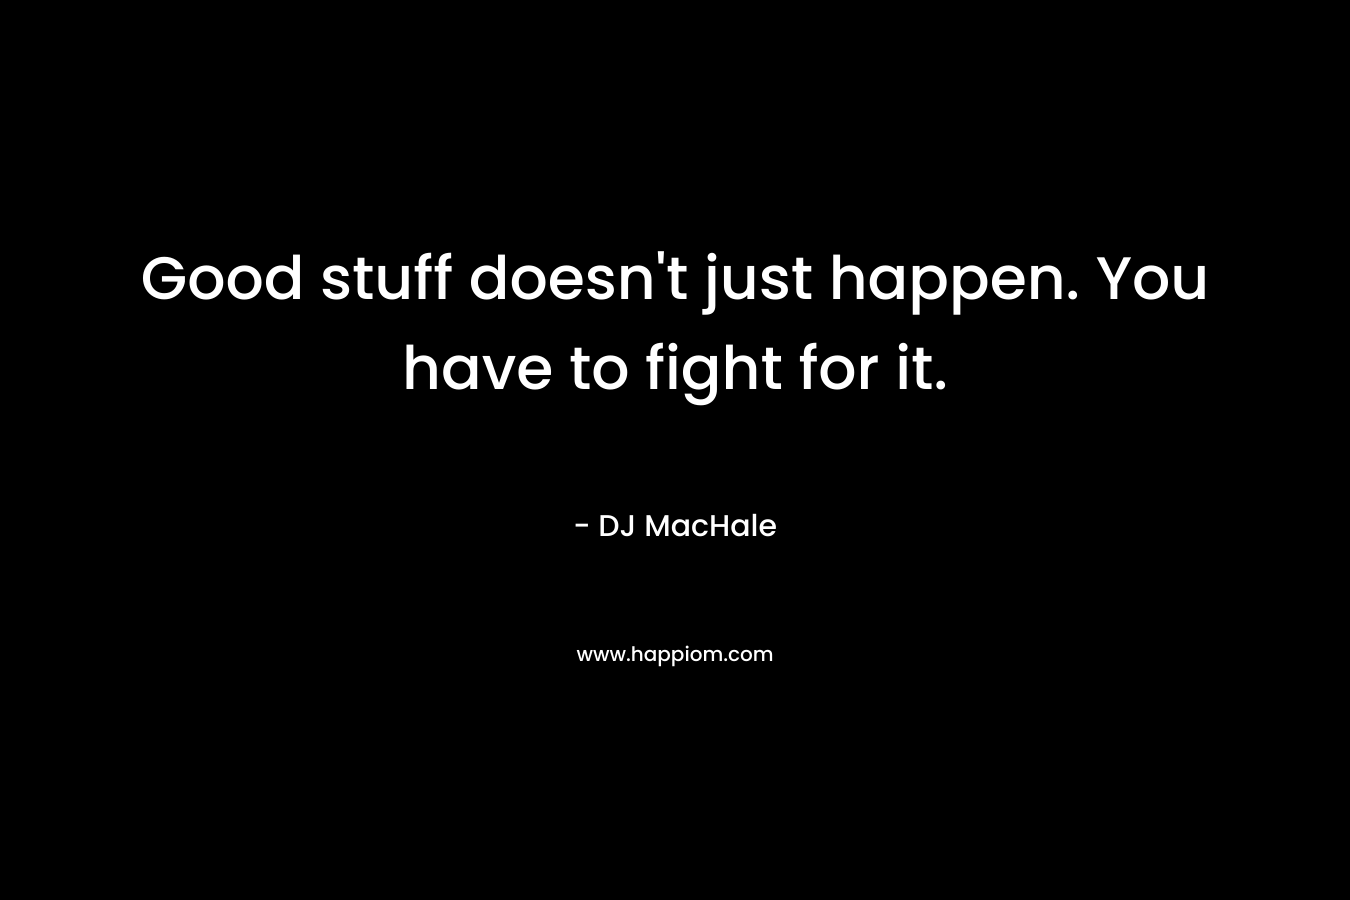 Good stuff doesn't just happen. You have to fight for it.